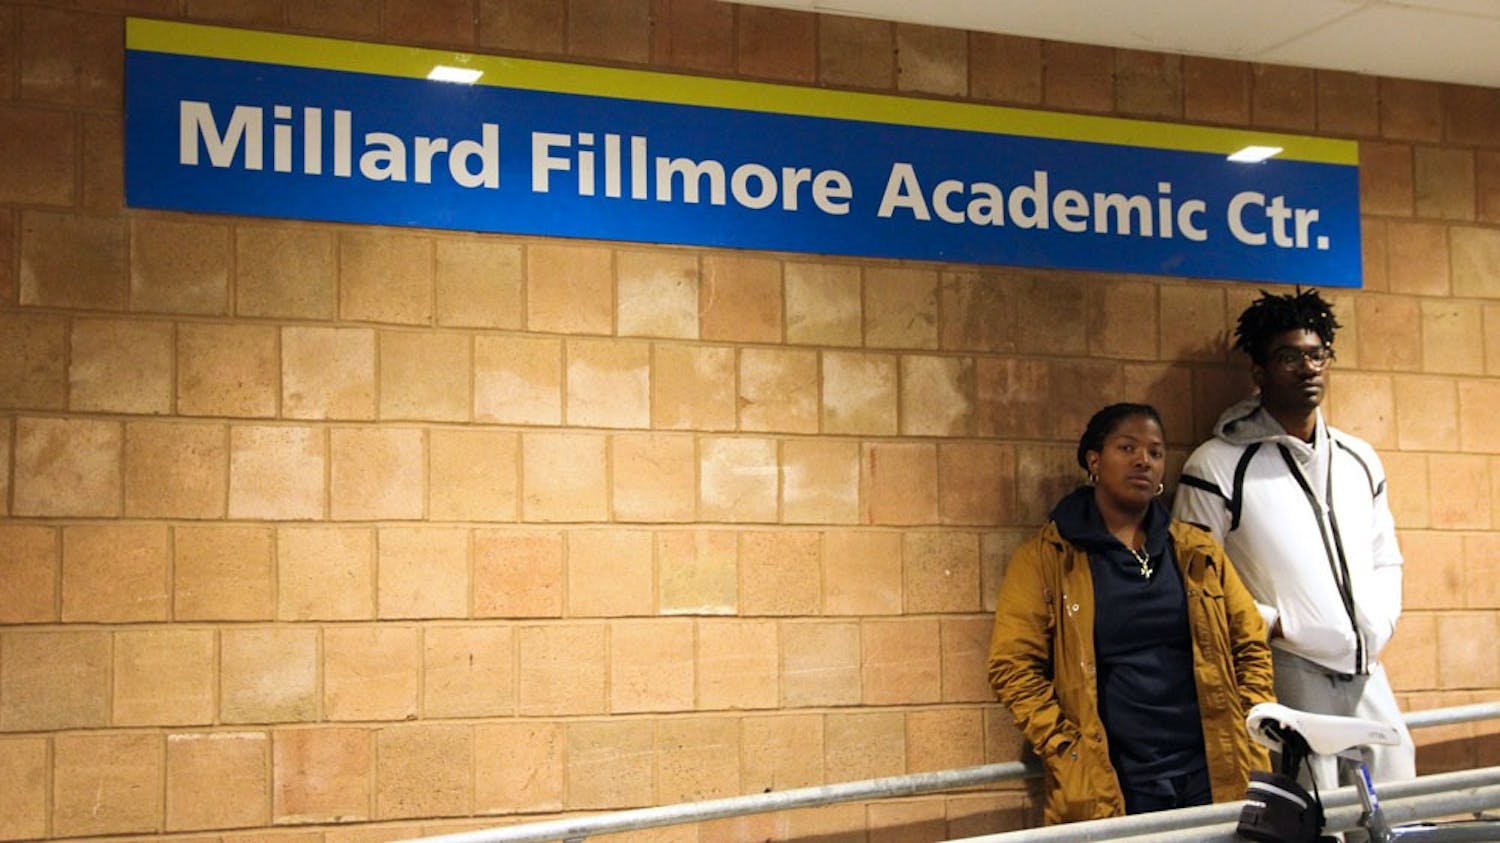 Deidree Golbourne (left) and Tavaine Whyte (right) stand outside of the Millard Fillmore Academic Center. The two question how UB represents Fillmore on campus and say more needs to be done to educate students of his history.